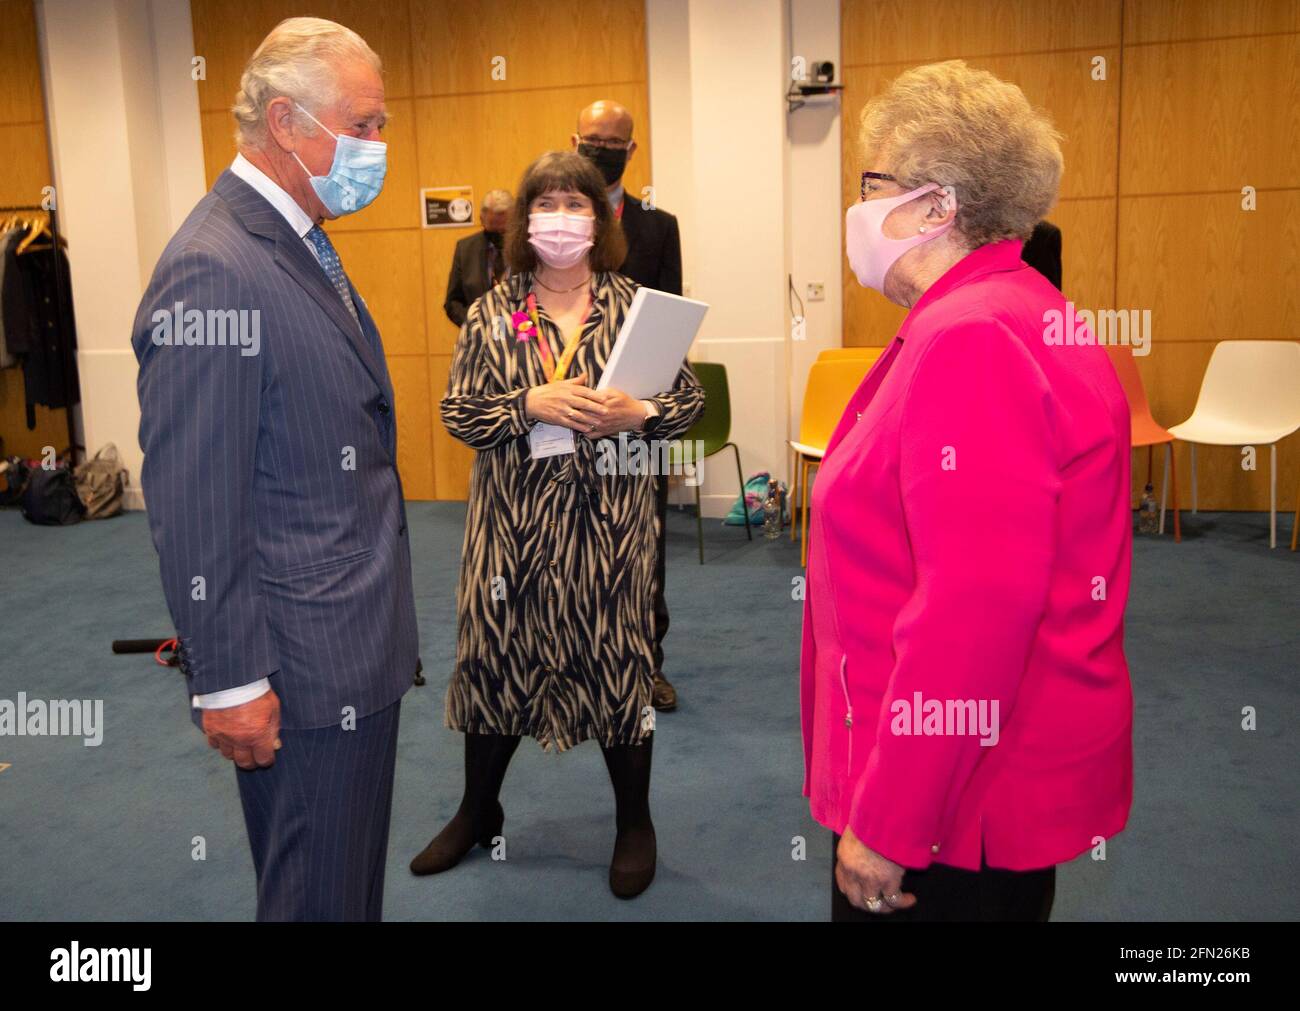 The Prince of Wales meets Audrey Phillips (78) from Stanmore during a visit to the the Breast Cancer Now Toby Robins Research Centre in London, 21 years after he formally opened the research centre. During the visit Charles heard about the charity's achievements and how Covid-19 has impacted their funded research. Picture date: Thursday May 13, 2021. Stock Photo